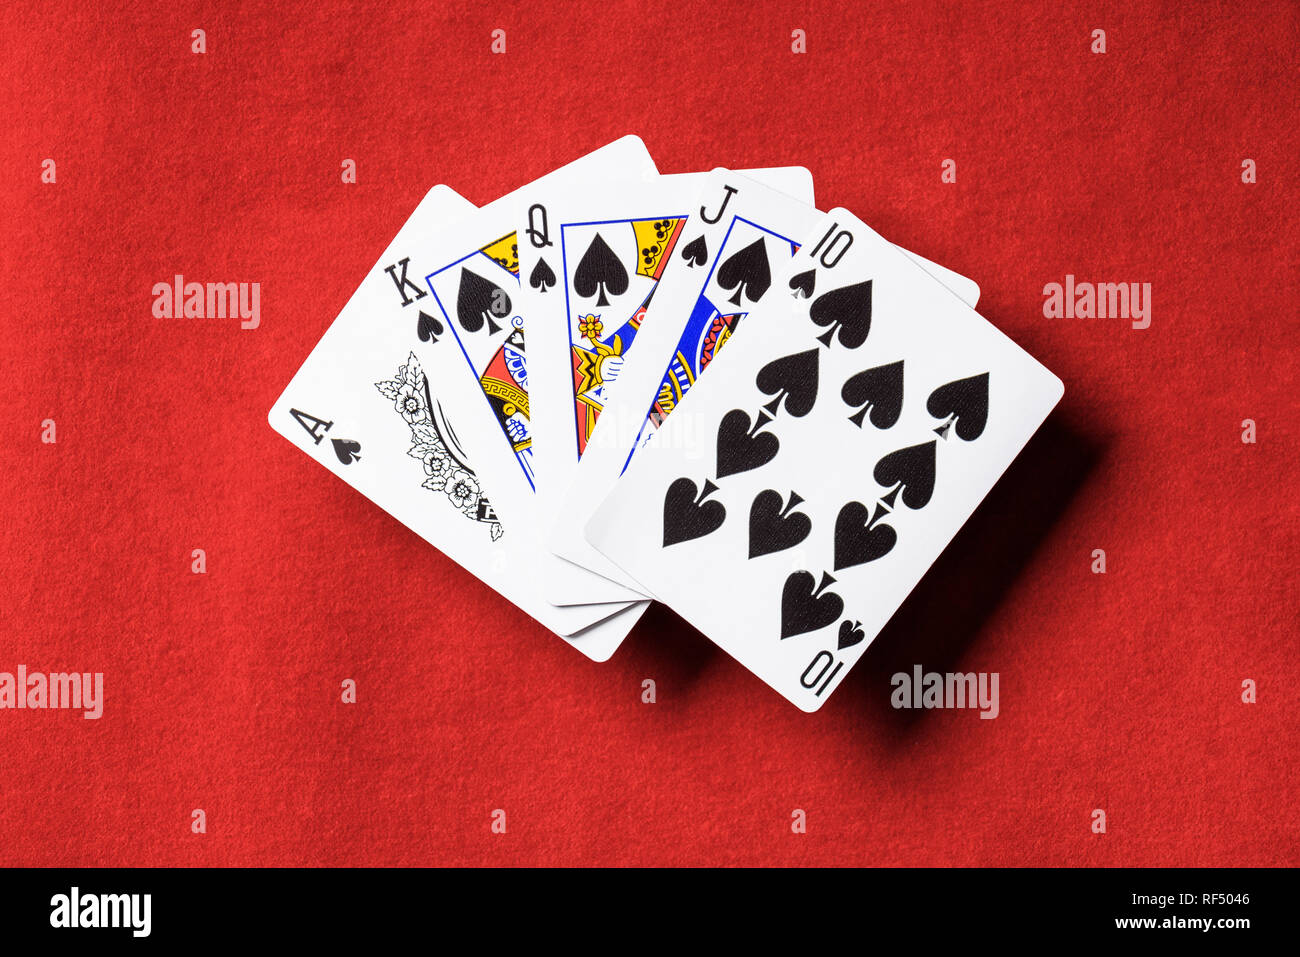 top view of red poker table and unfolded playing cards with spades suit  Stock Photo - Alamy